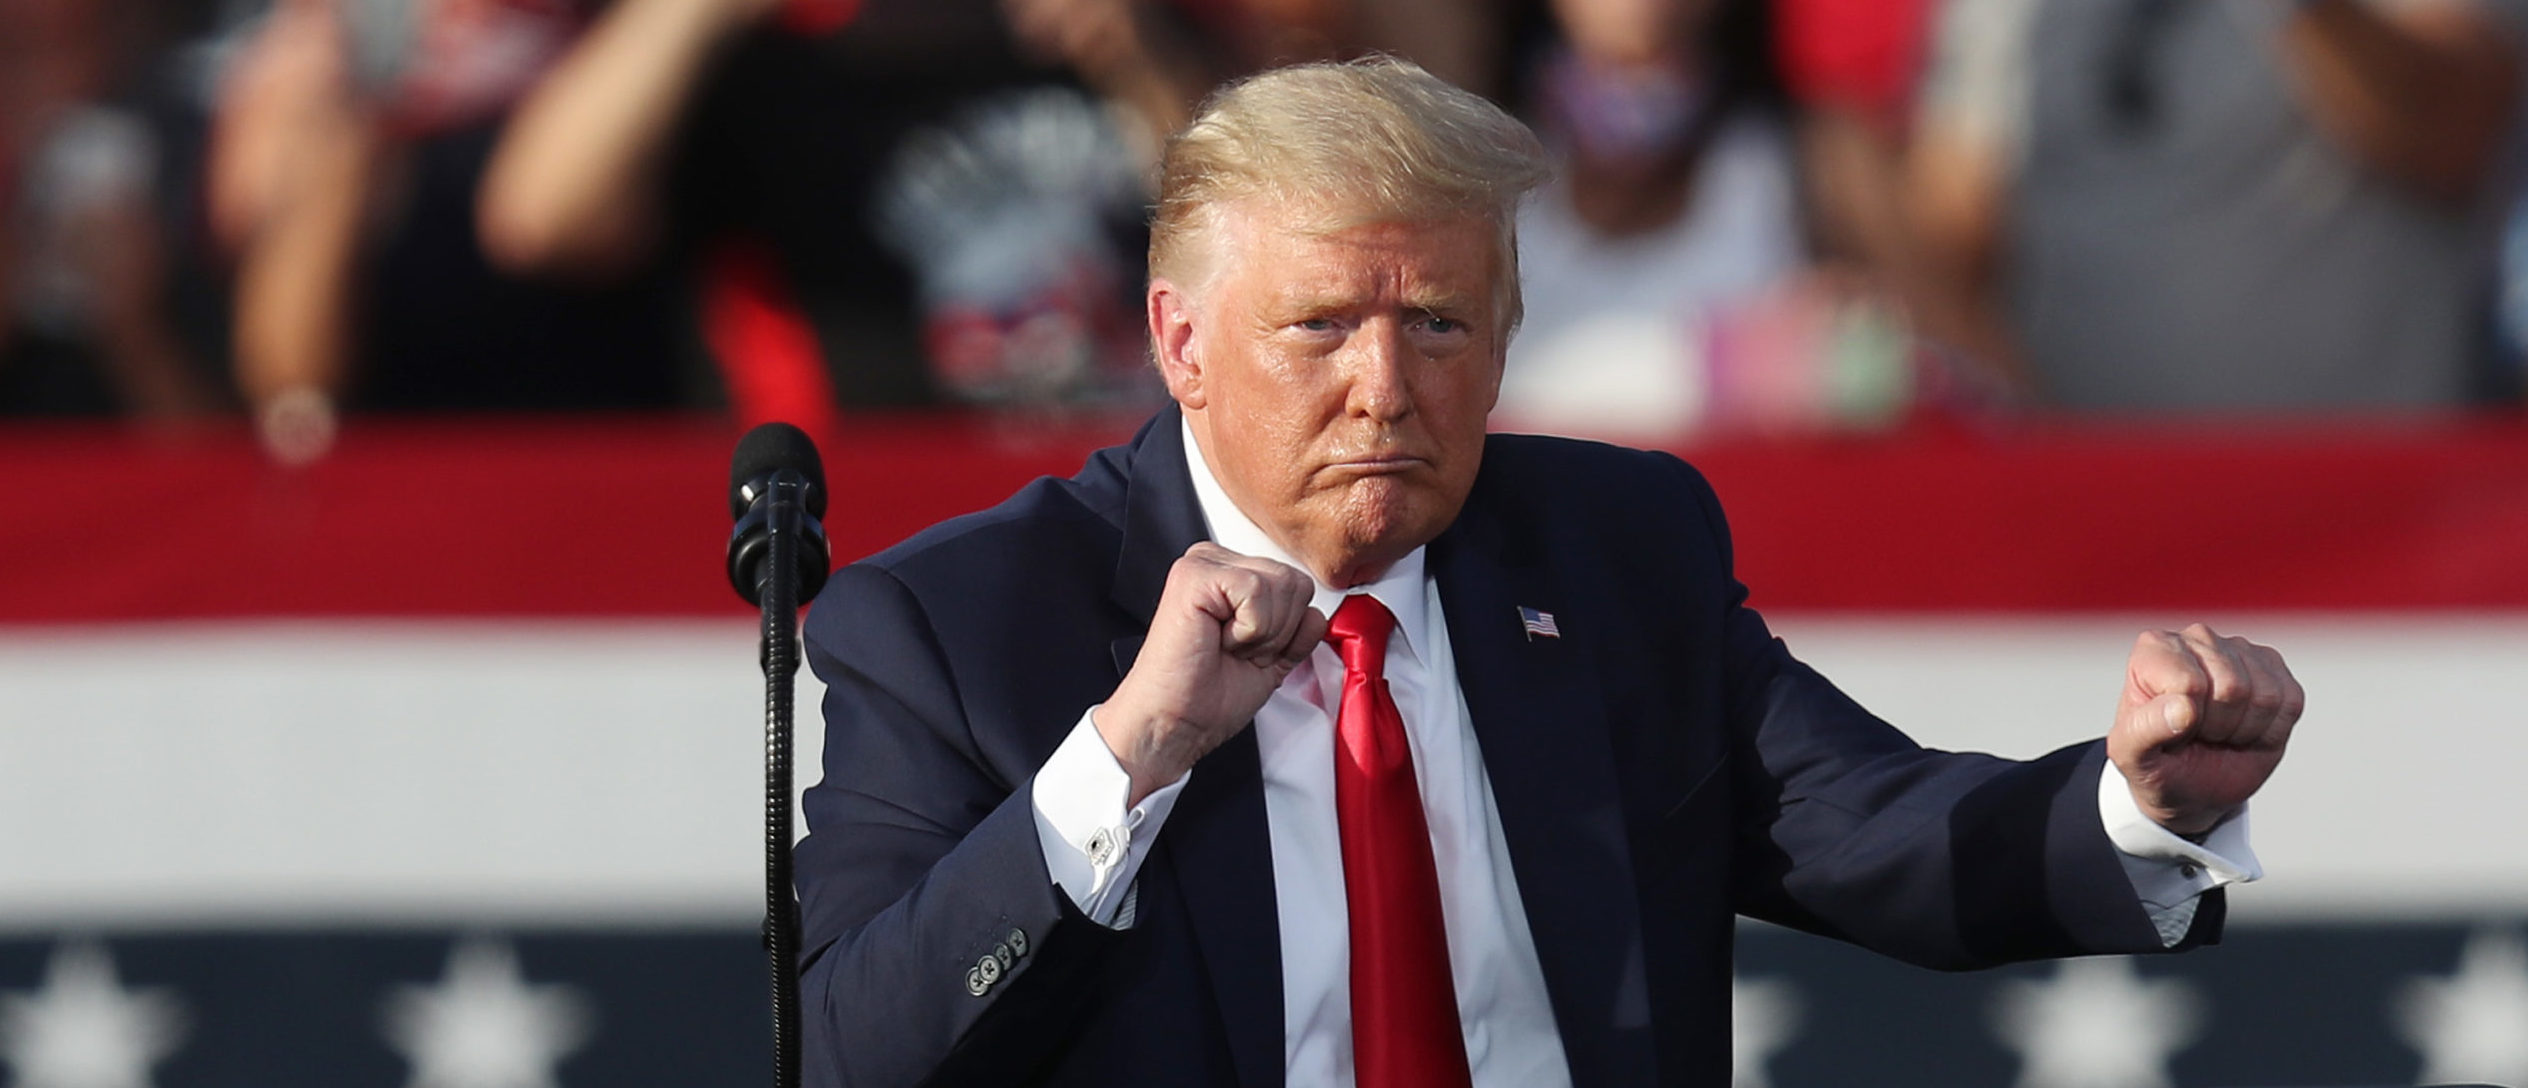 Trump Sneaks Ahead Of Biden In Rasmussen Poll For First Time Since